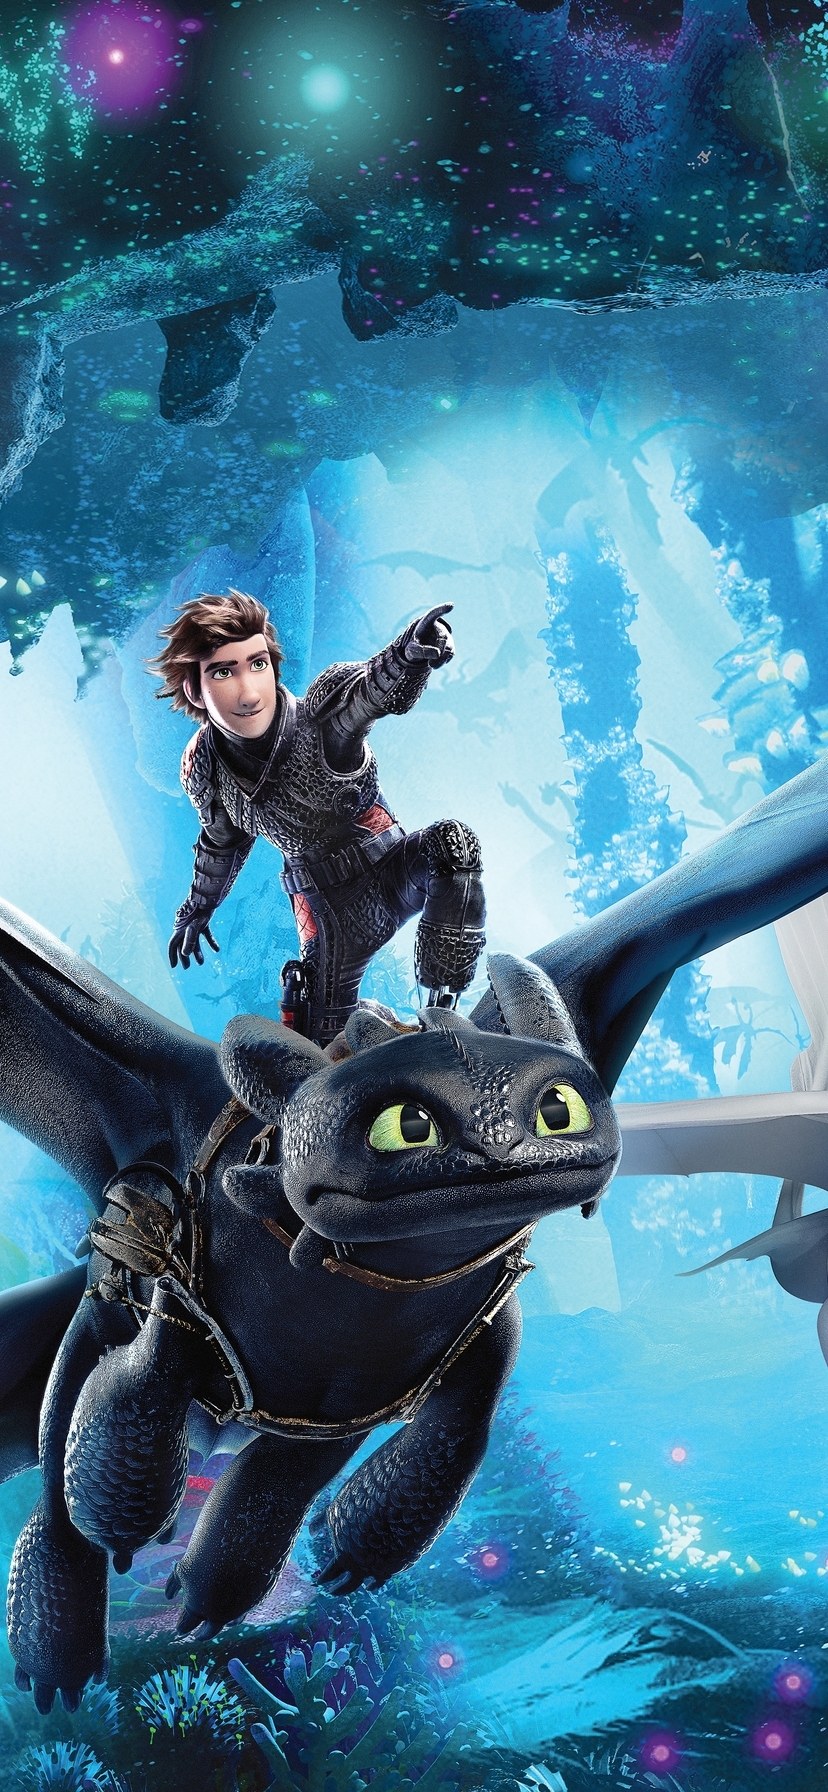 Image: World, dragons, Night fury, Day fury, wings, flight, toothless, Hiccup, How to train your dragon 3, Hidden world, How to train your dragon 3: the hidden world